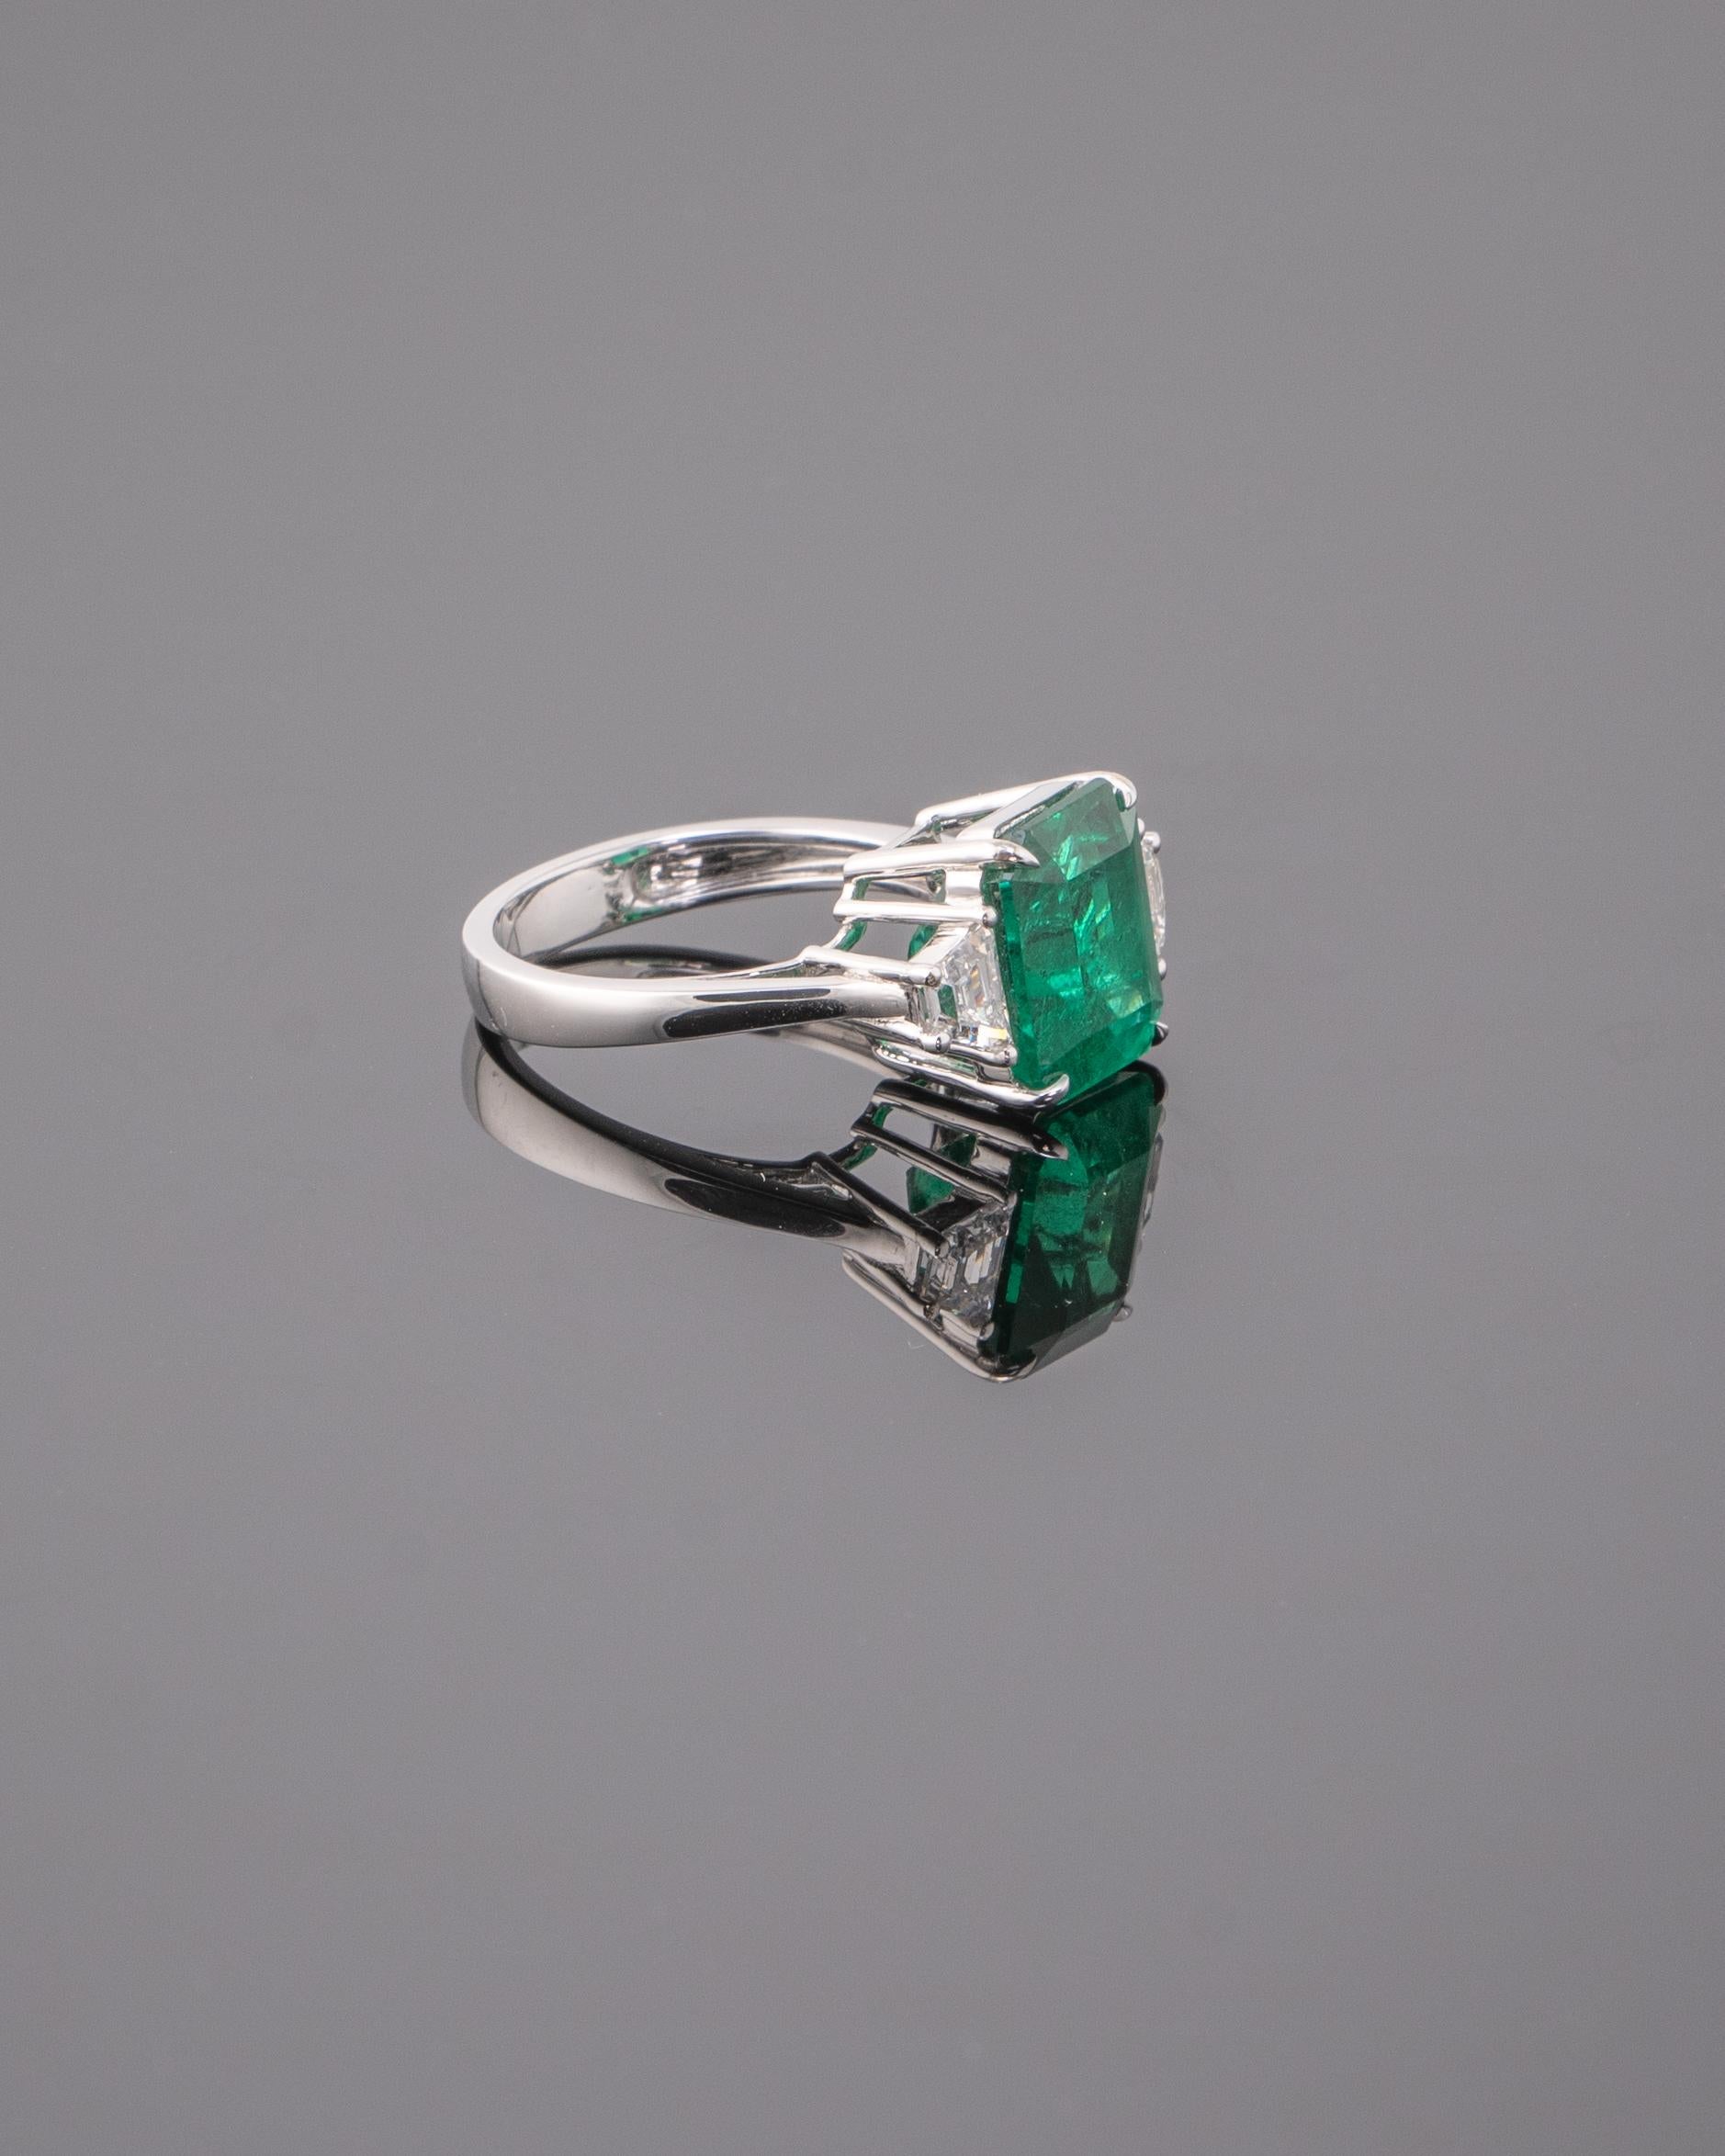 A stunning three stone engagement ring, with a 6.43 carat transparent natural Zambian Emerald centre stone and 2 half-moon side stone diamonds. The emerald is of great lustre and has an ideal colour. All set in 18K white gold. Currently a ring size